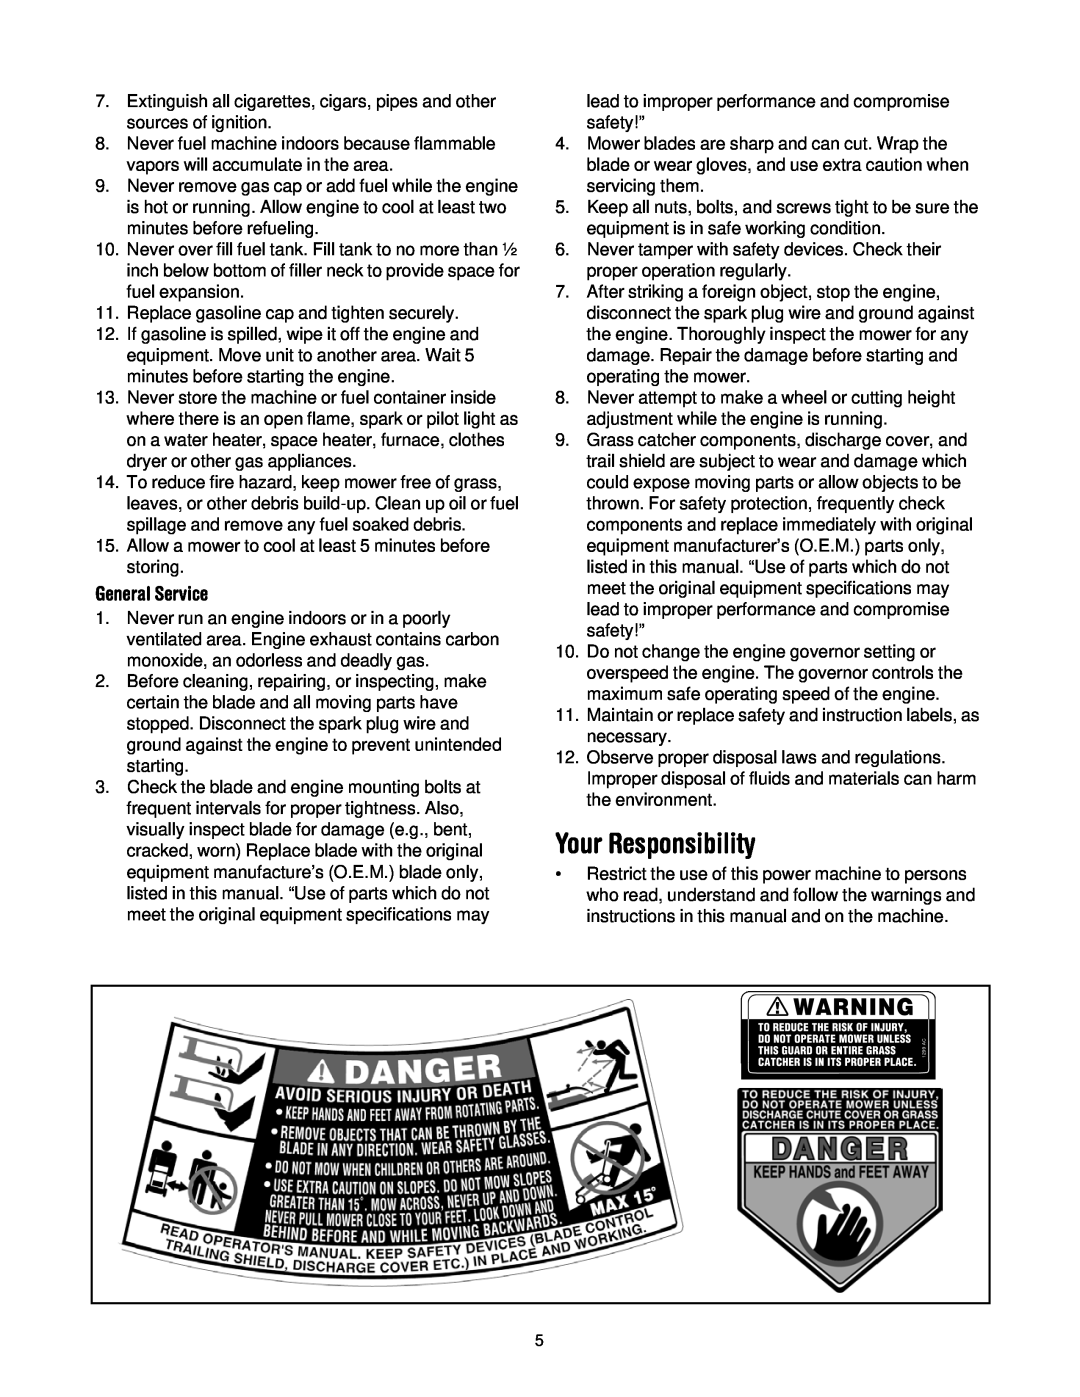 Troy-Bilt 436 manual Your Responsibility, General Service 